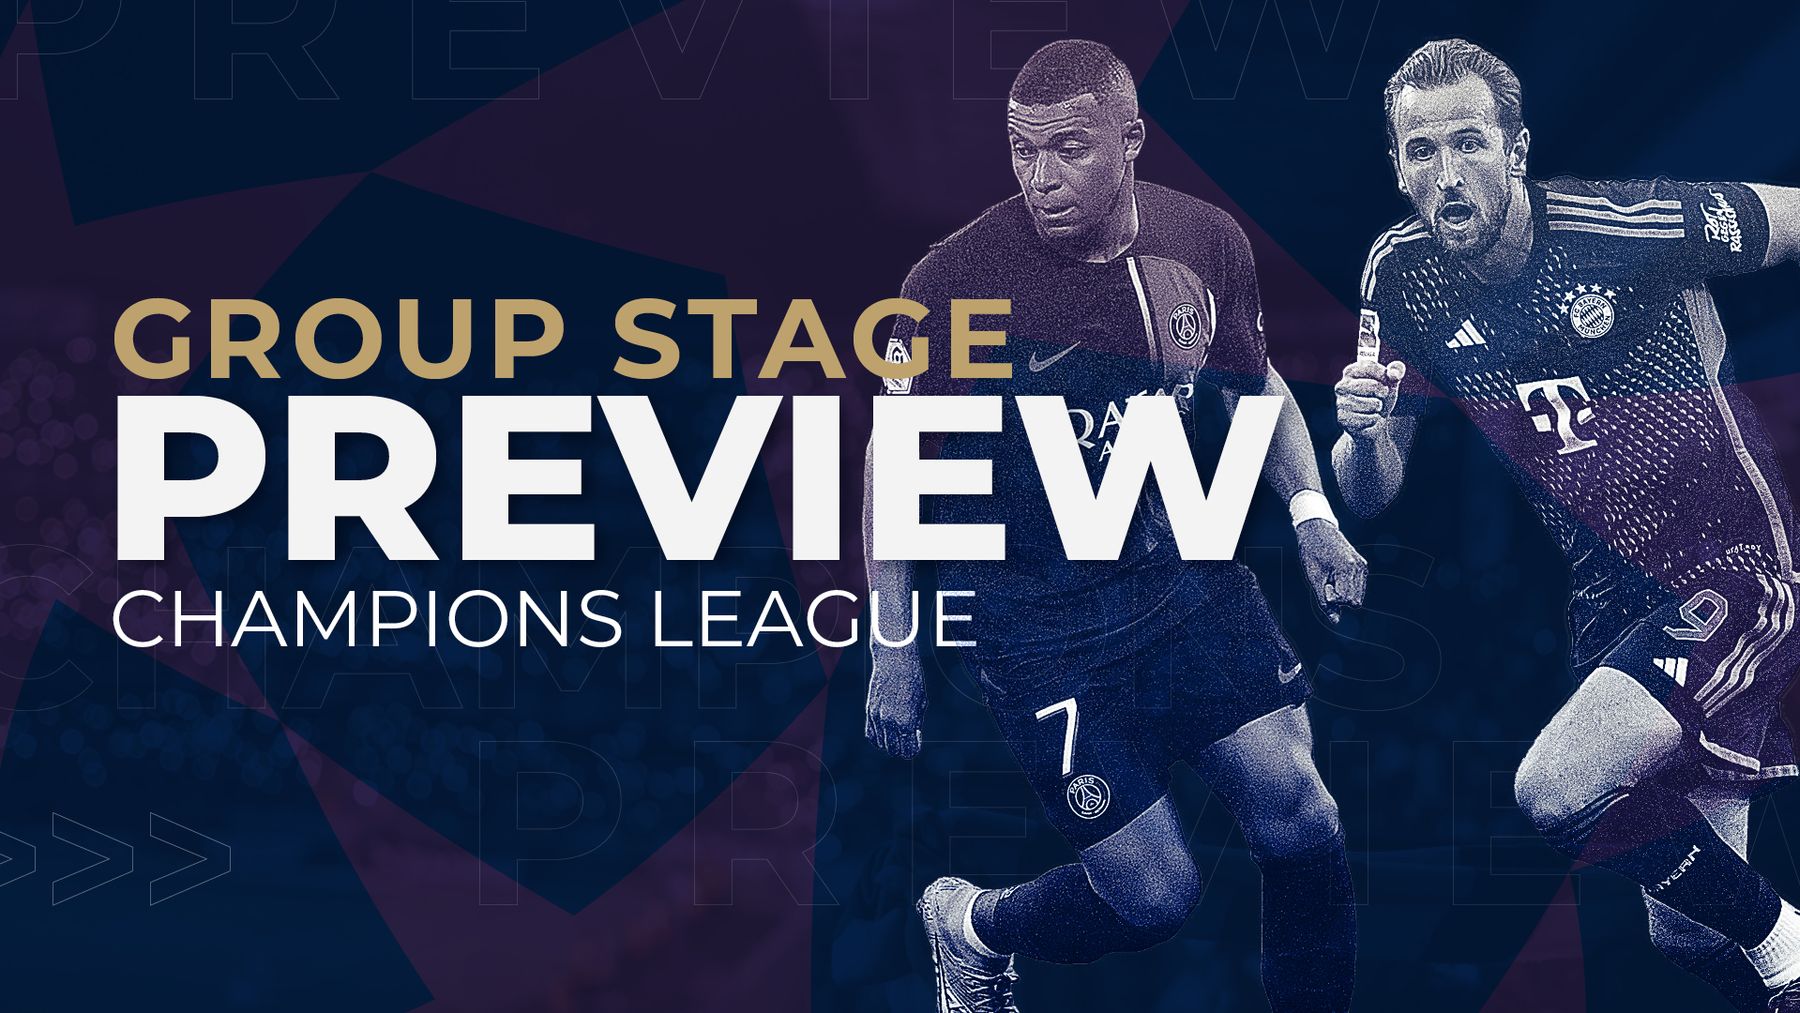 Key thoughts and analysis from Matchday 5 in the Champions League